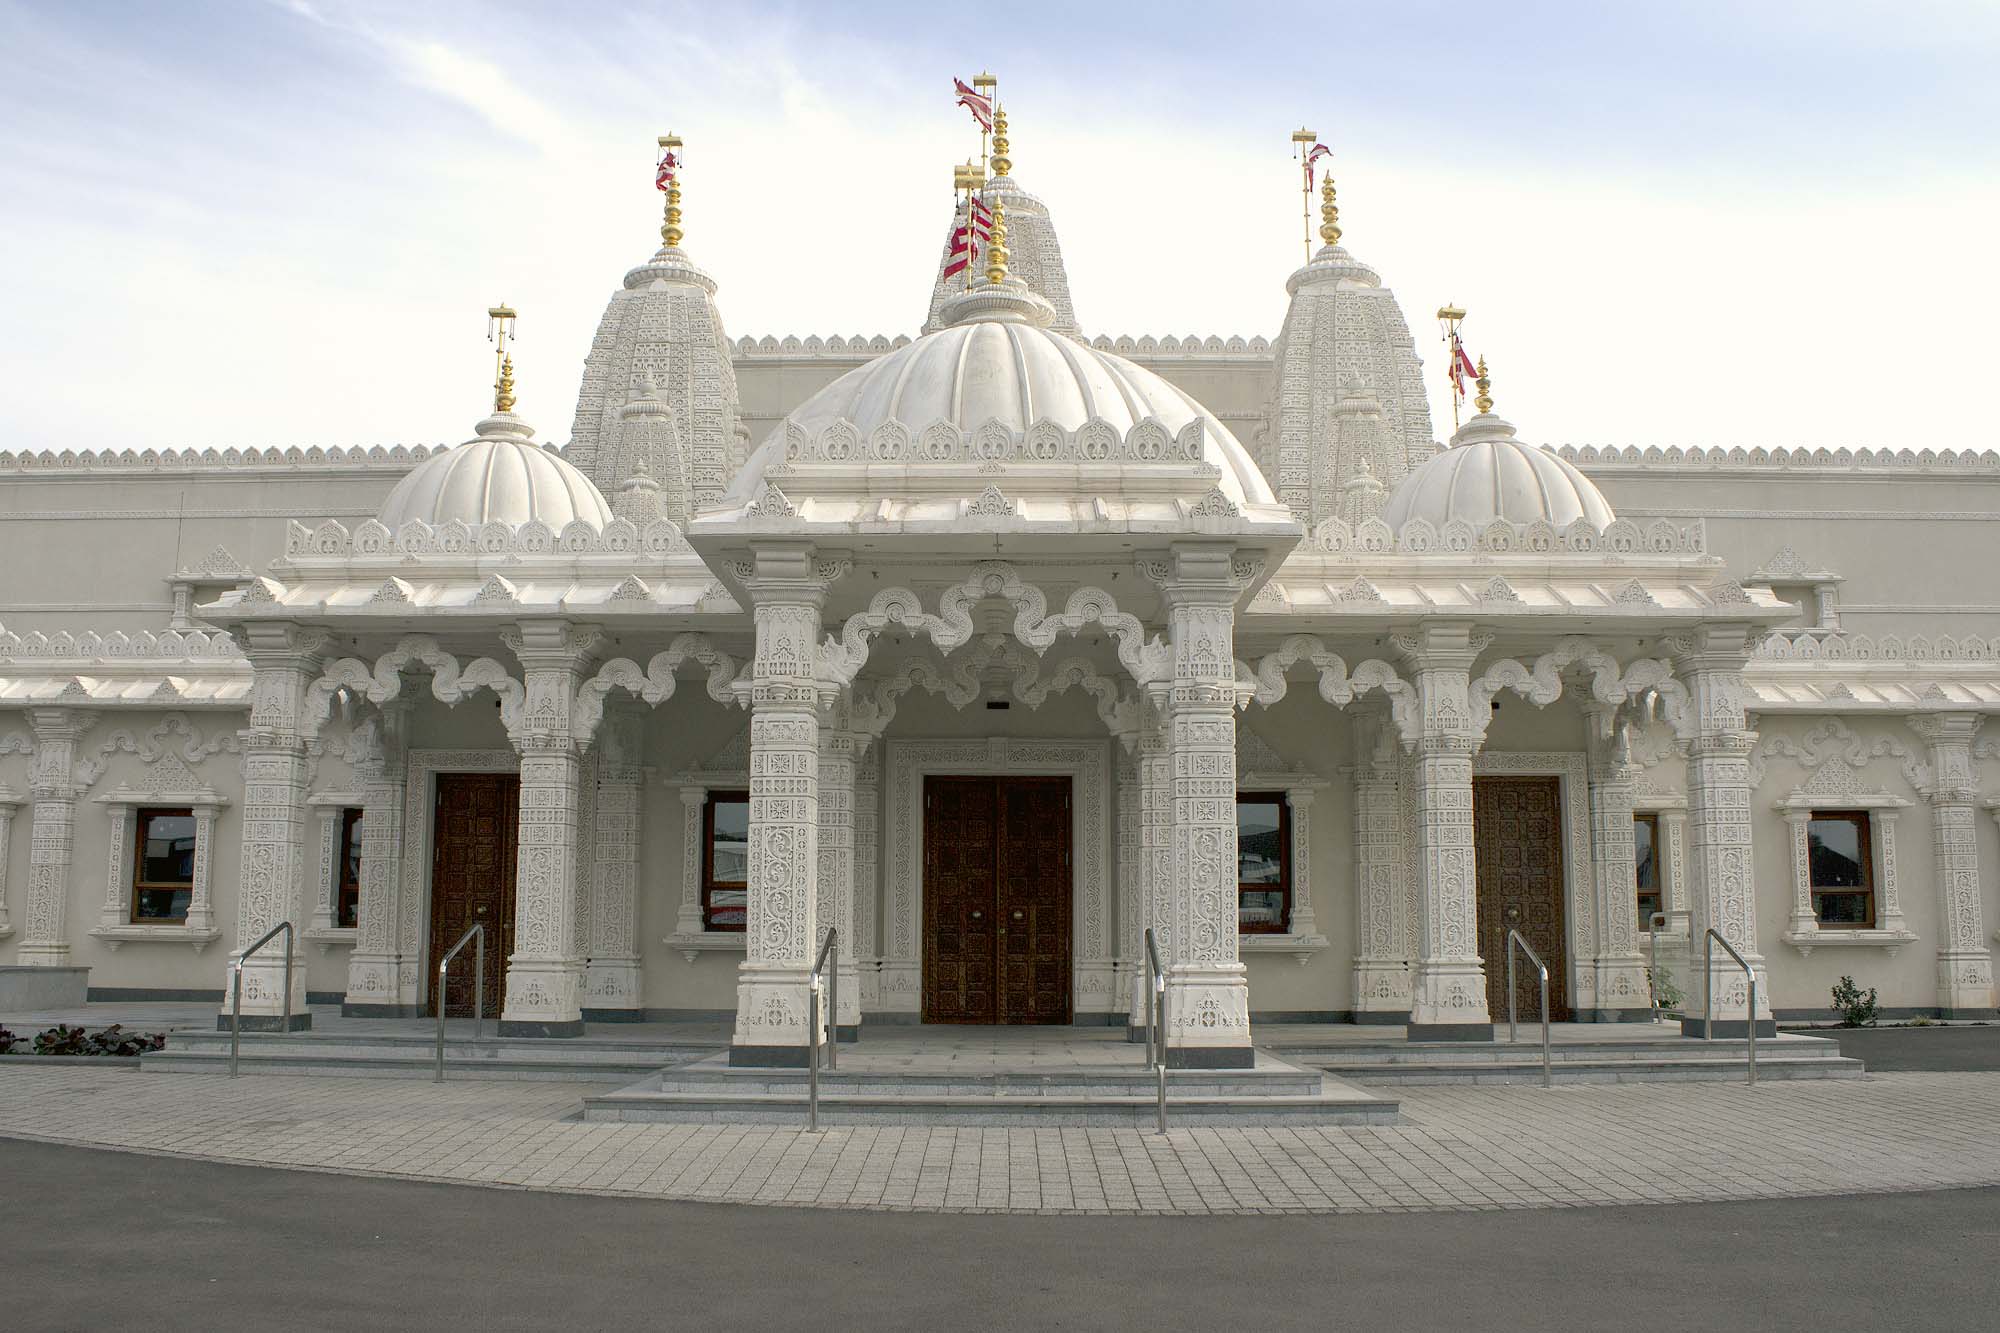 The front entrance has white limestone that was exquisitely carved in India - 